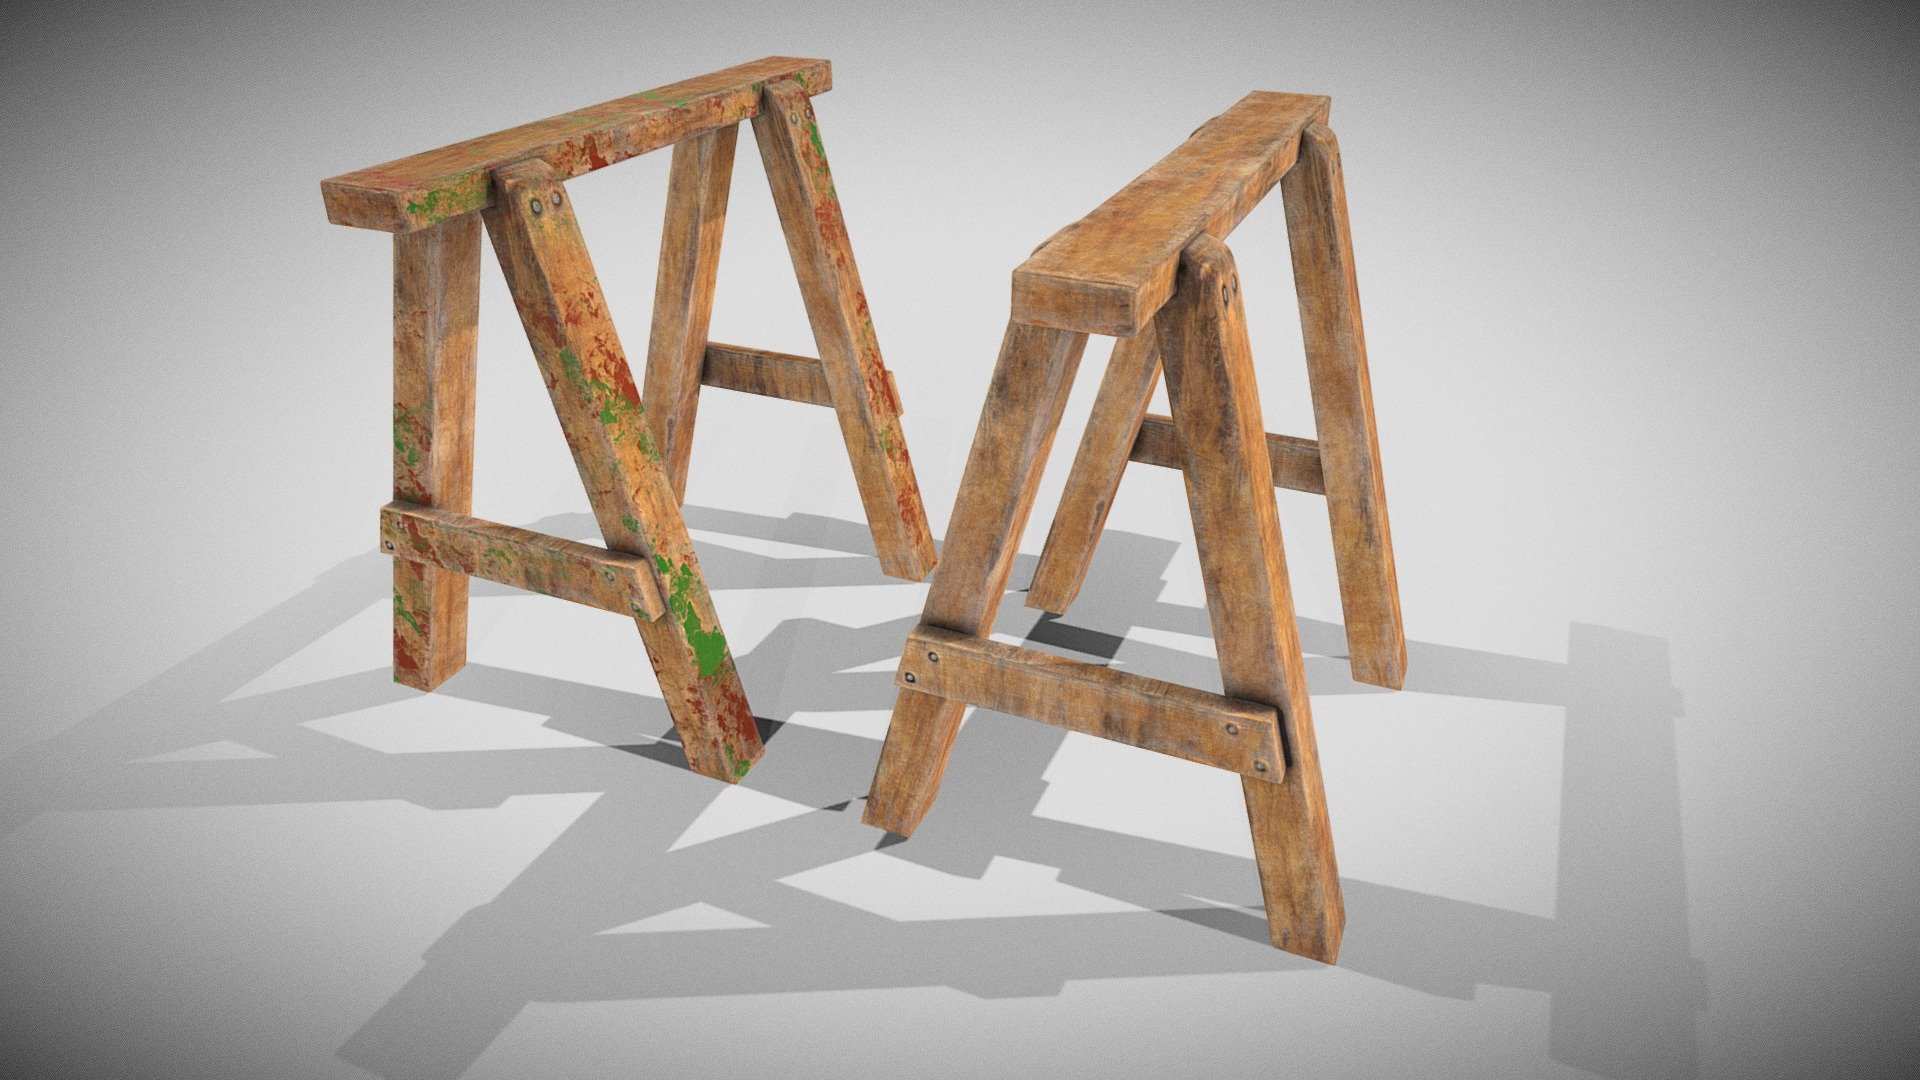 Wooden used saw horse, only differnce between both versons is one has splashes of paint on it.  Super handy prop to use in multiple environments. 

PBR textures @4k

if you have any requests get in touch 3d model